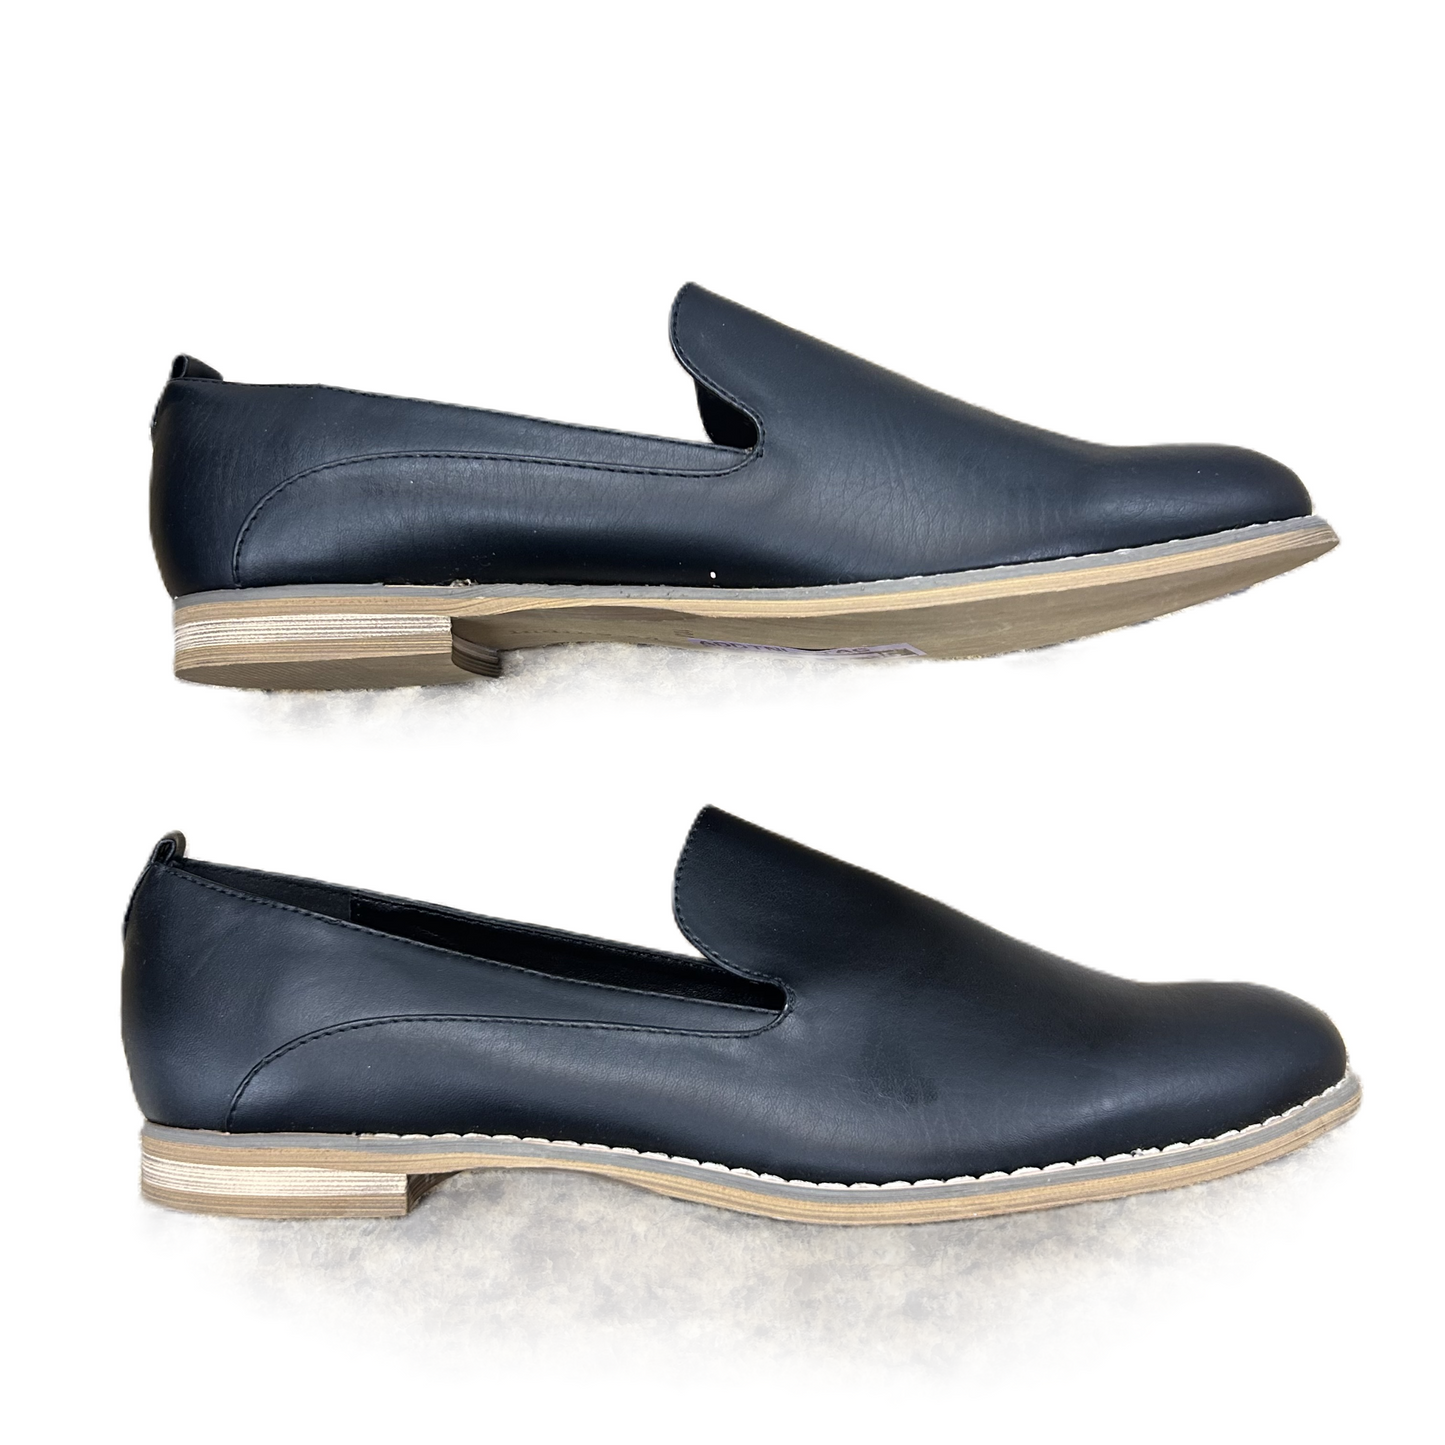 Black Shoes Flats By Indigo Rd, Size: 11